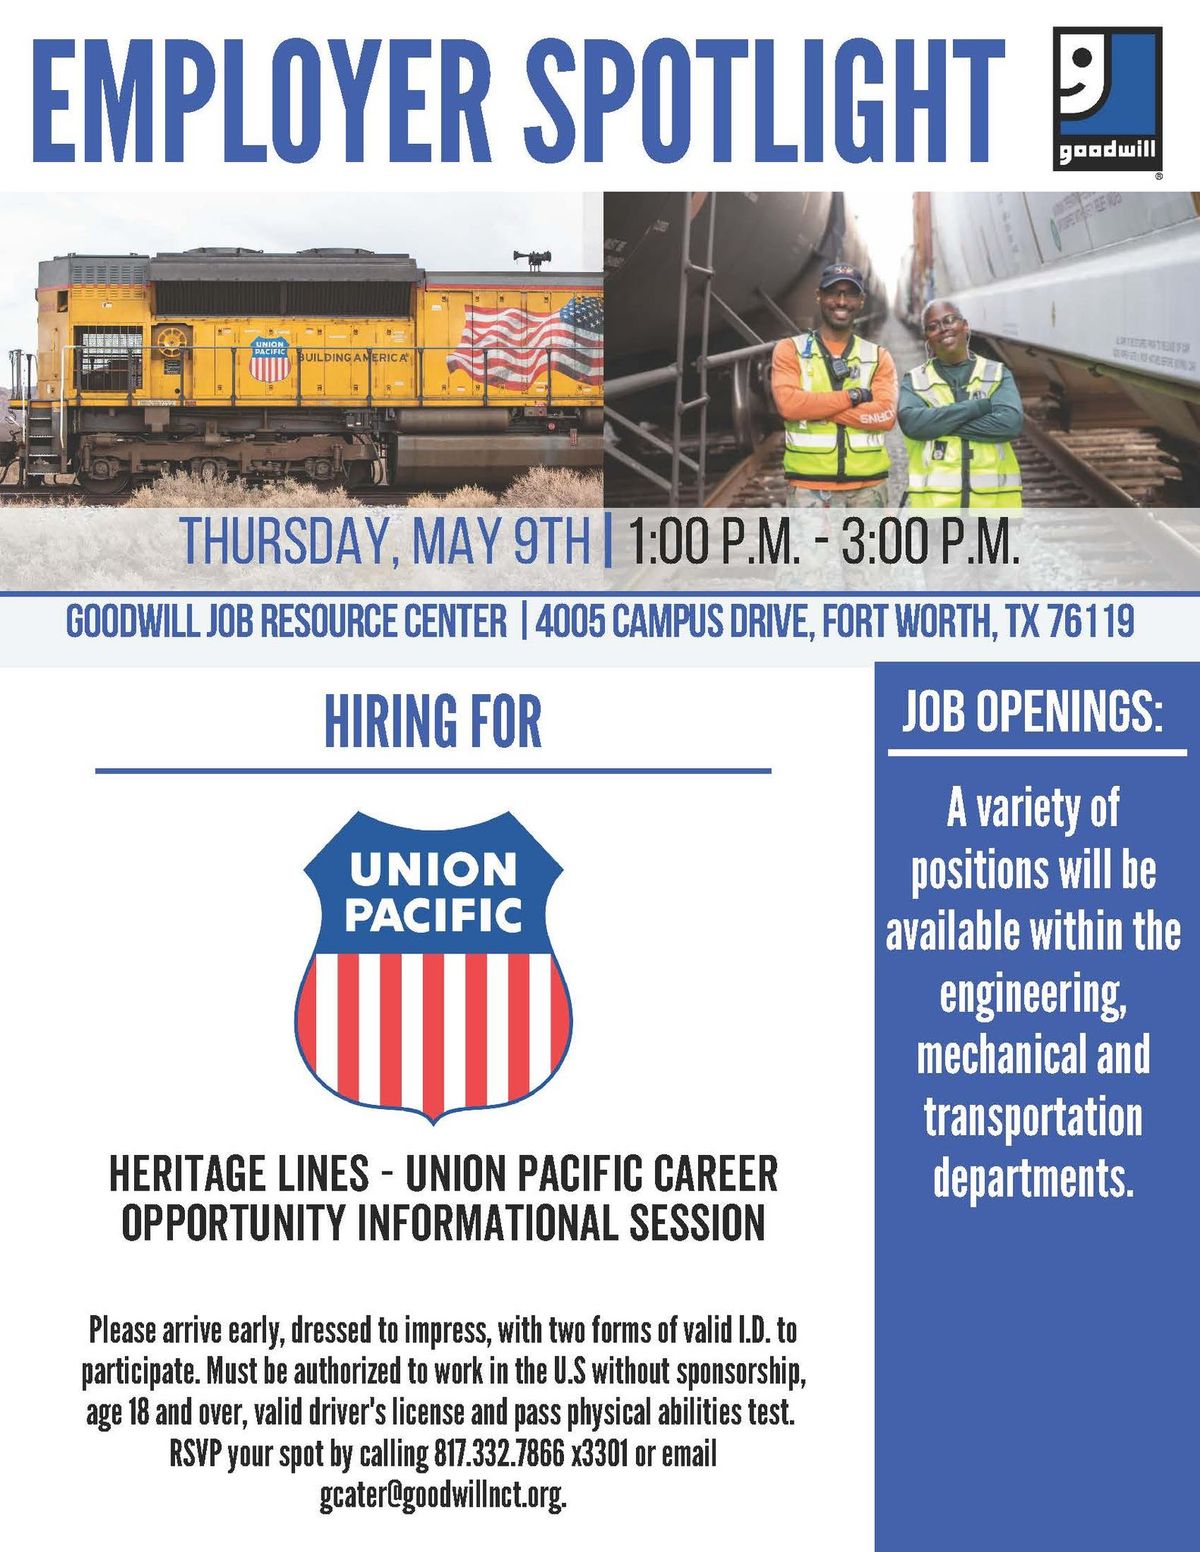 Union Pacific Heritage Line Hiring Event